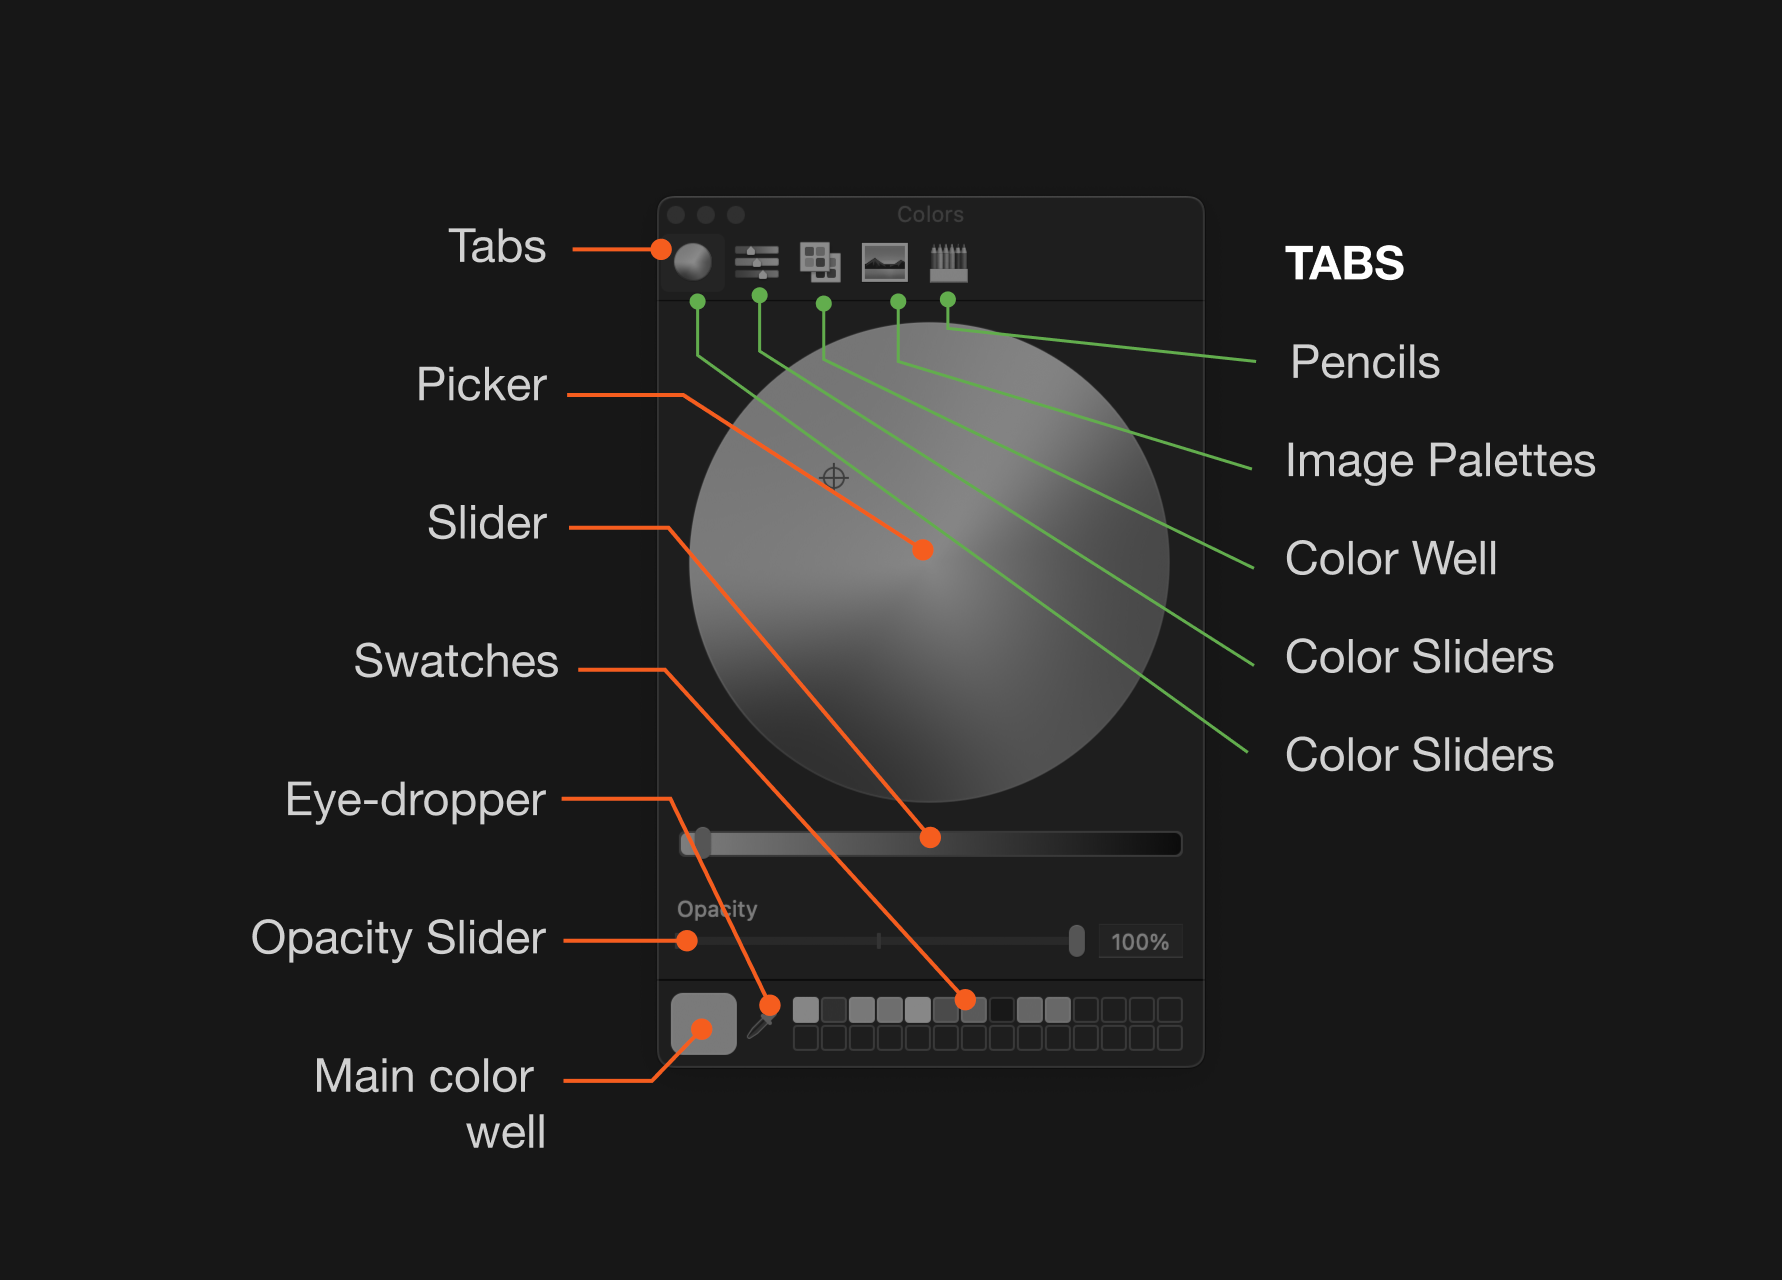 Illustration showing the various parts of the color picker, such as tabs, picker, swatches, slider, and eye-dropper